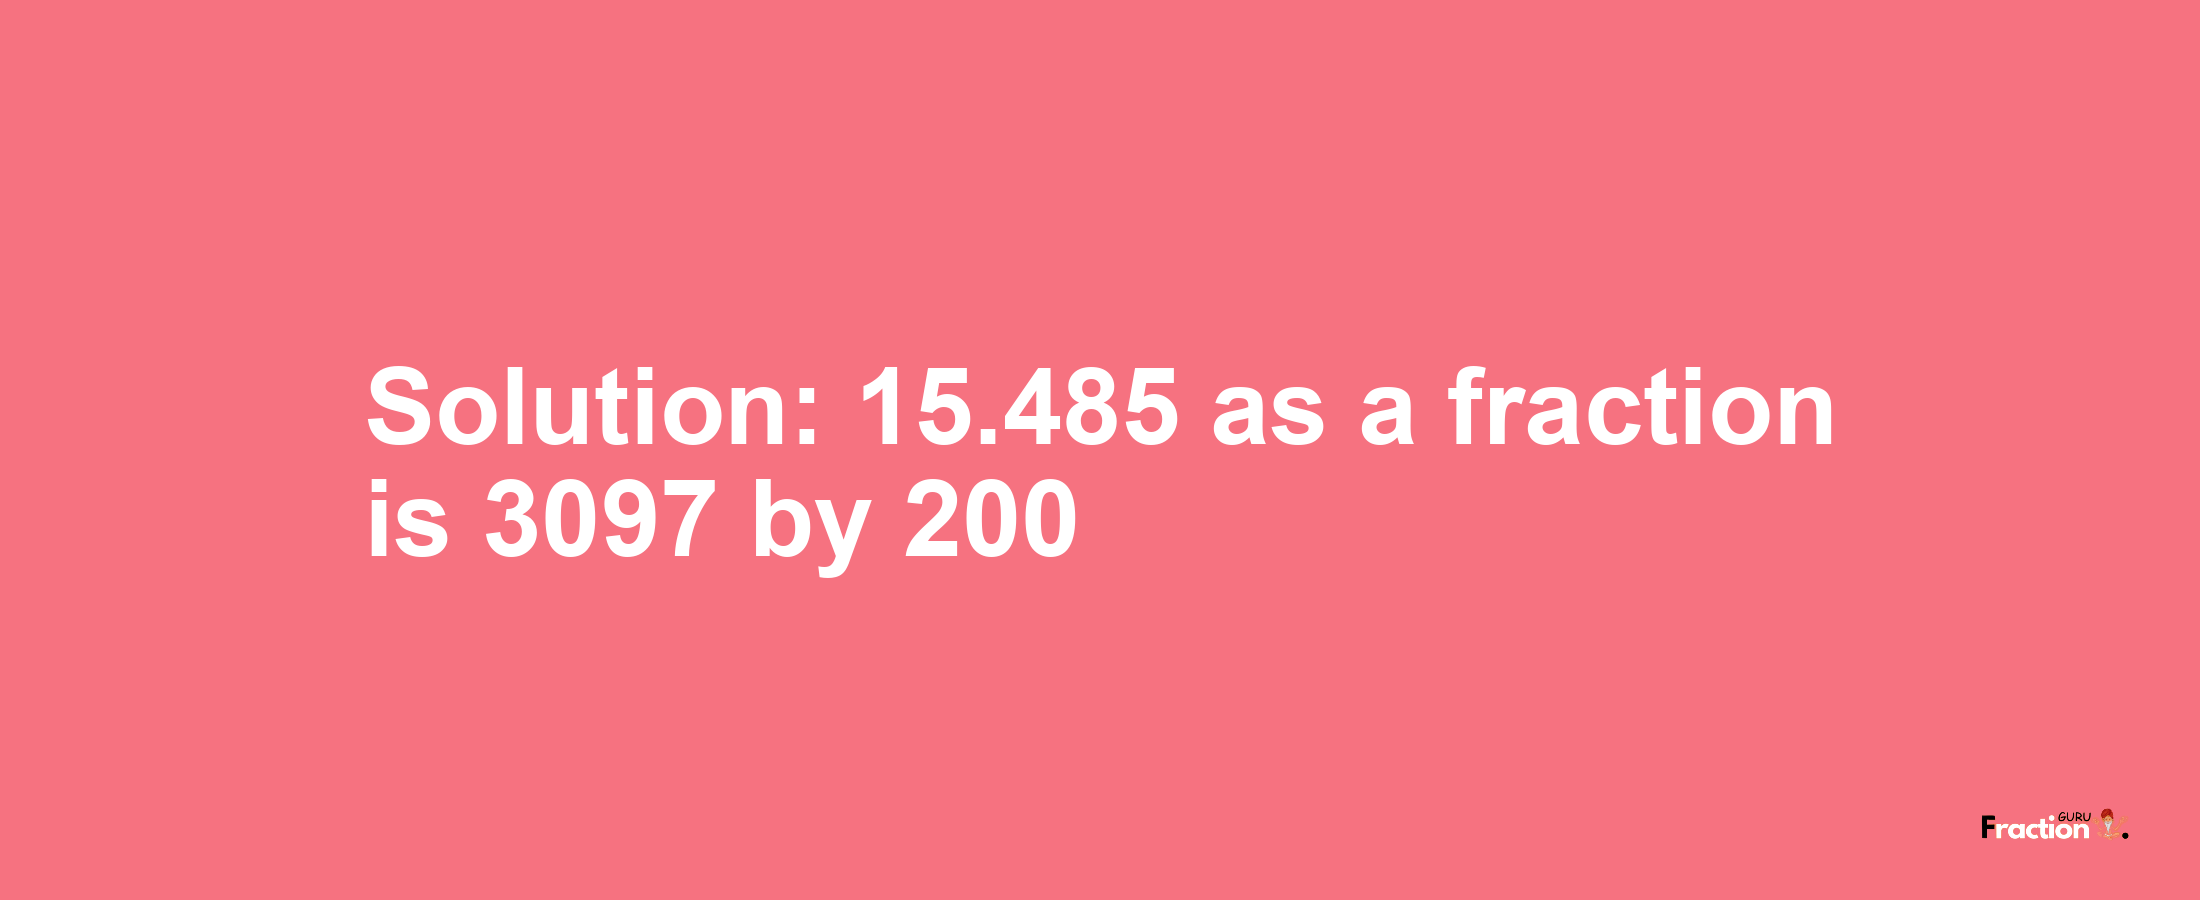 Solution:15.485 as a fraction is 3097/200